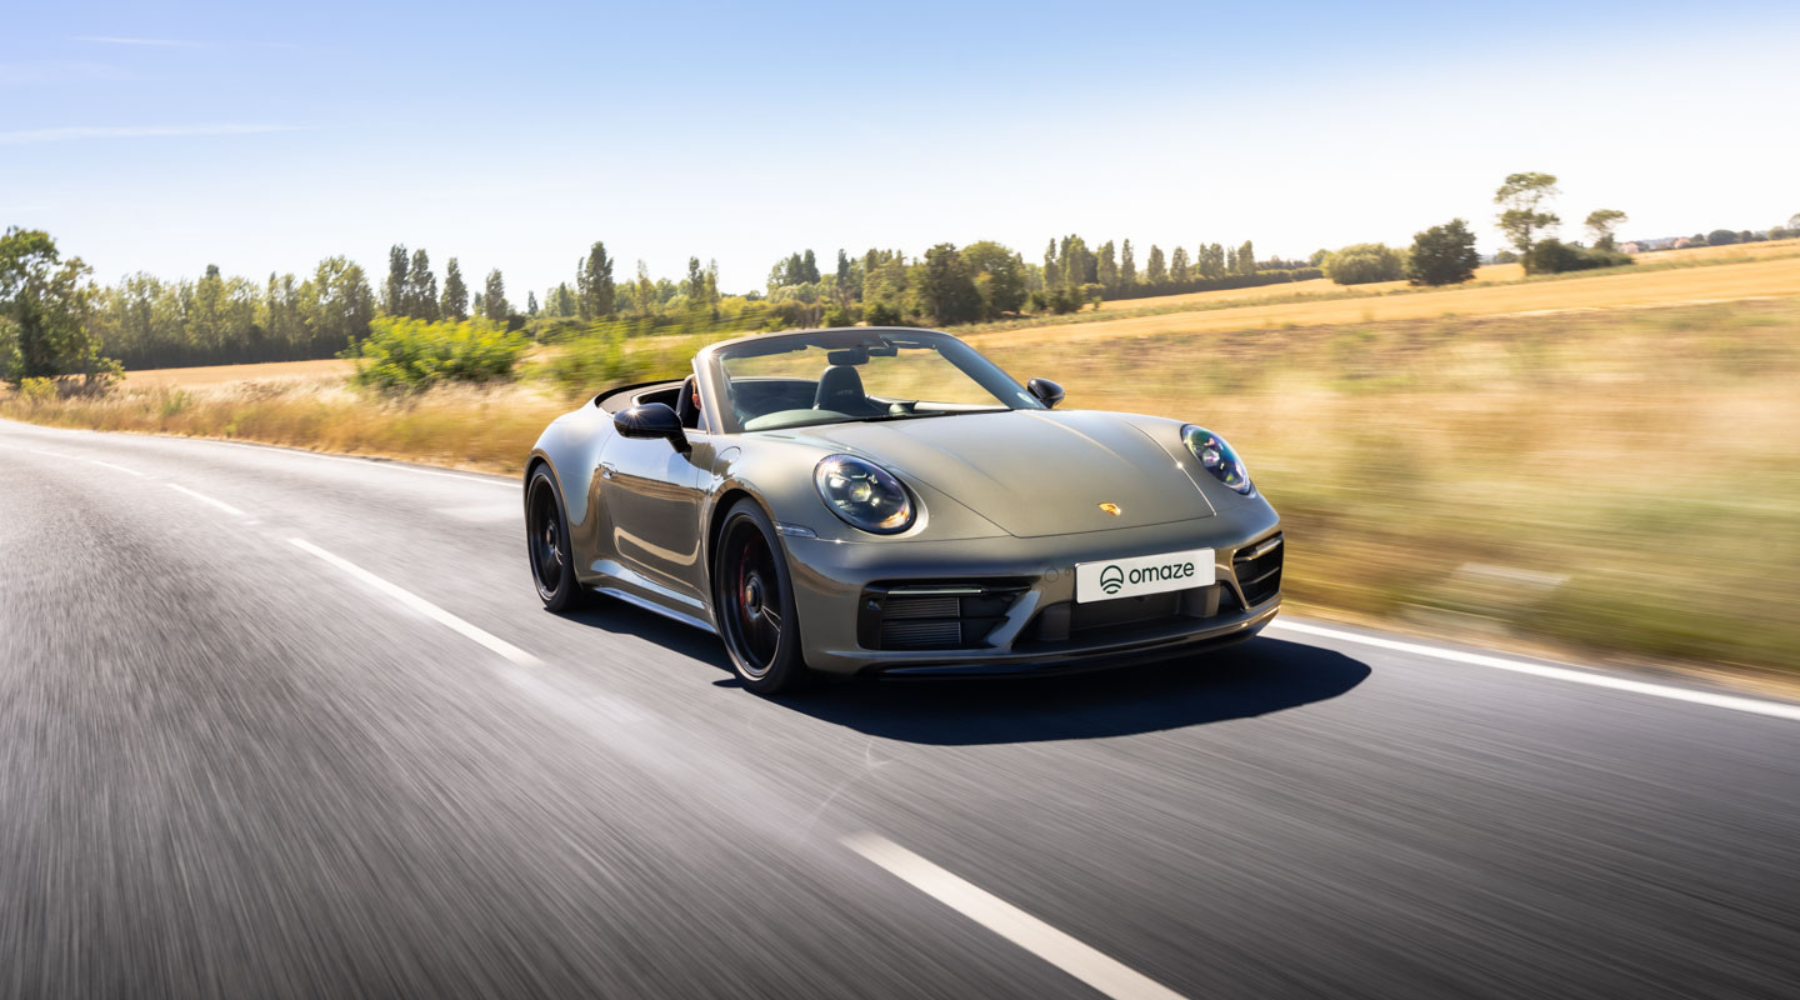 Omaze Million Pound House Draw Marbella Win a Porsche 911 GTS. Porsche being driven along the road with blurred trees and fields in the background